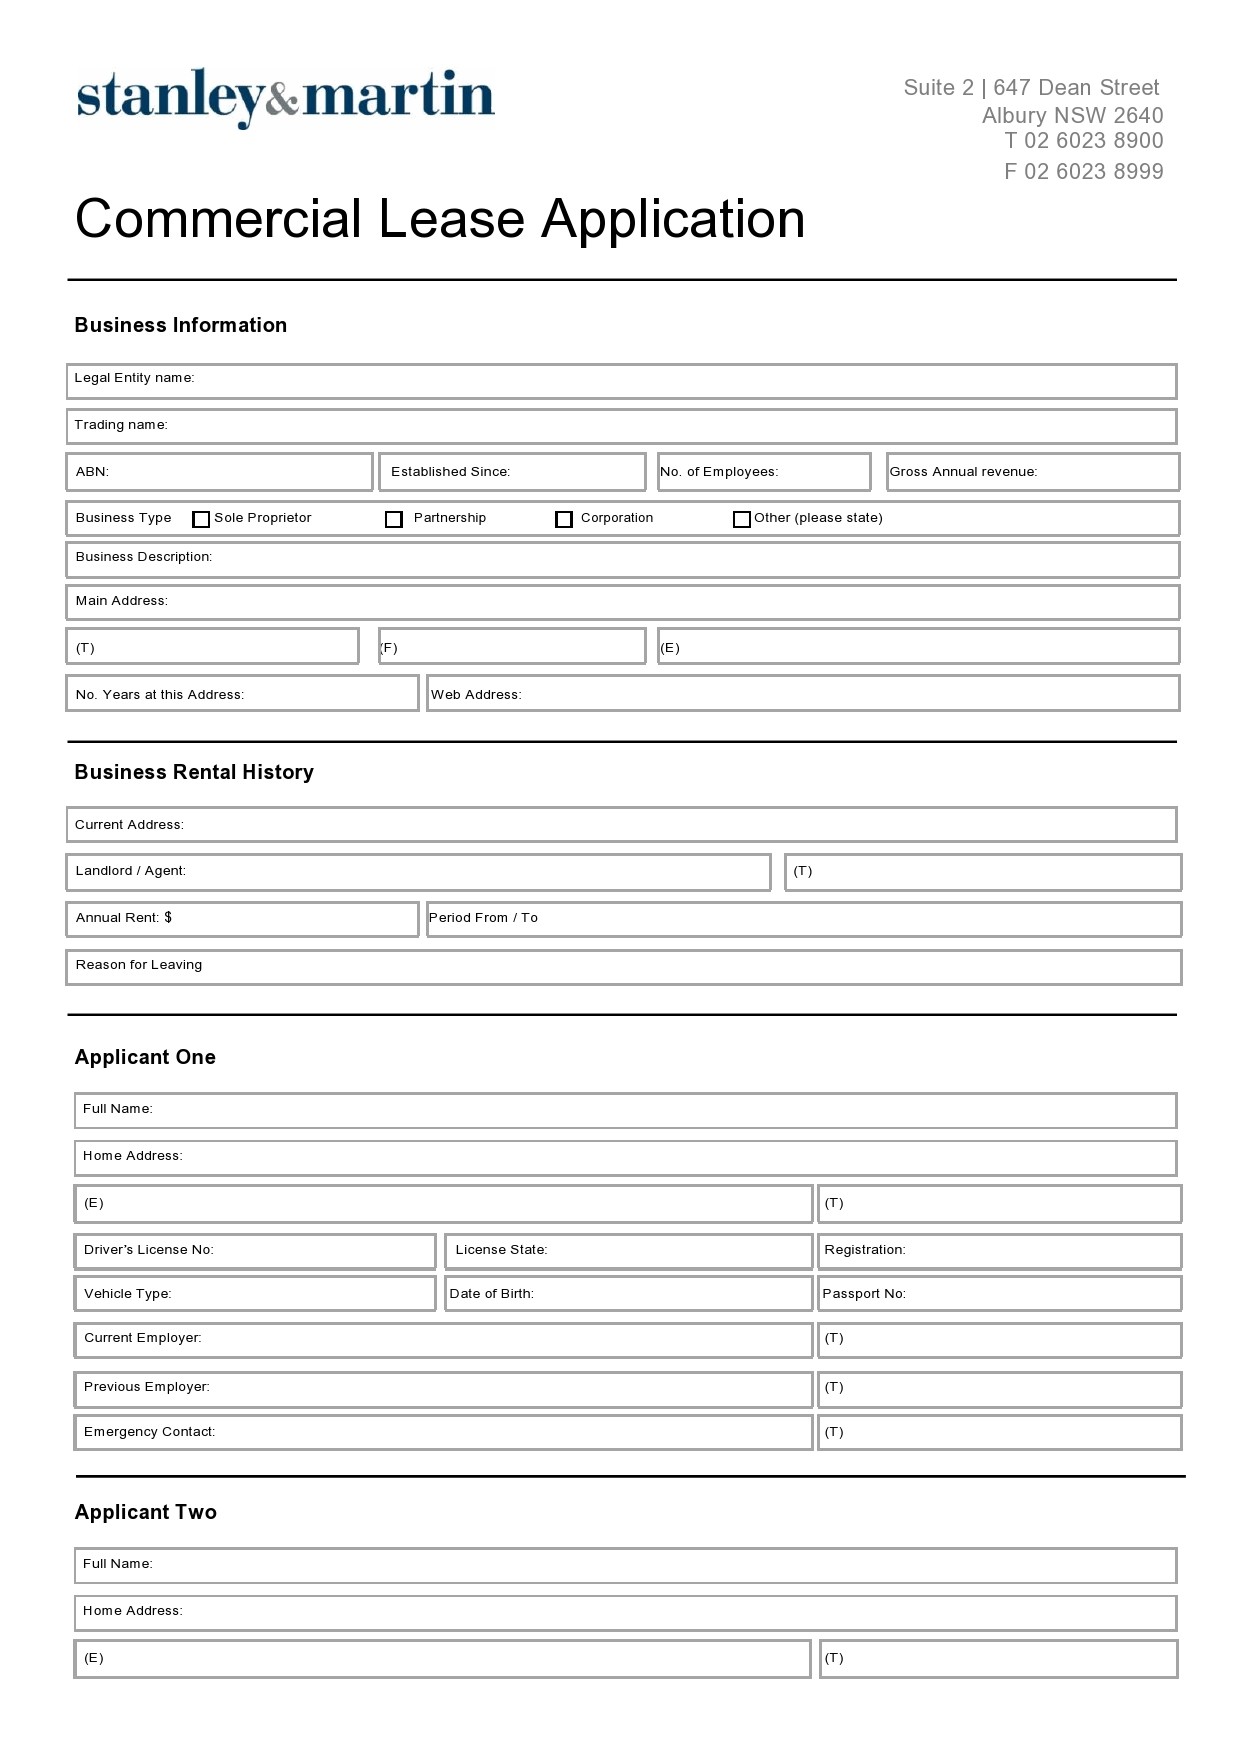 Free commercial lease application 02